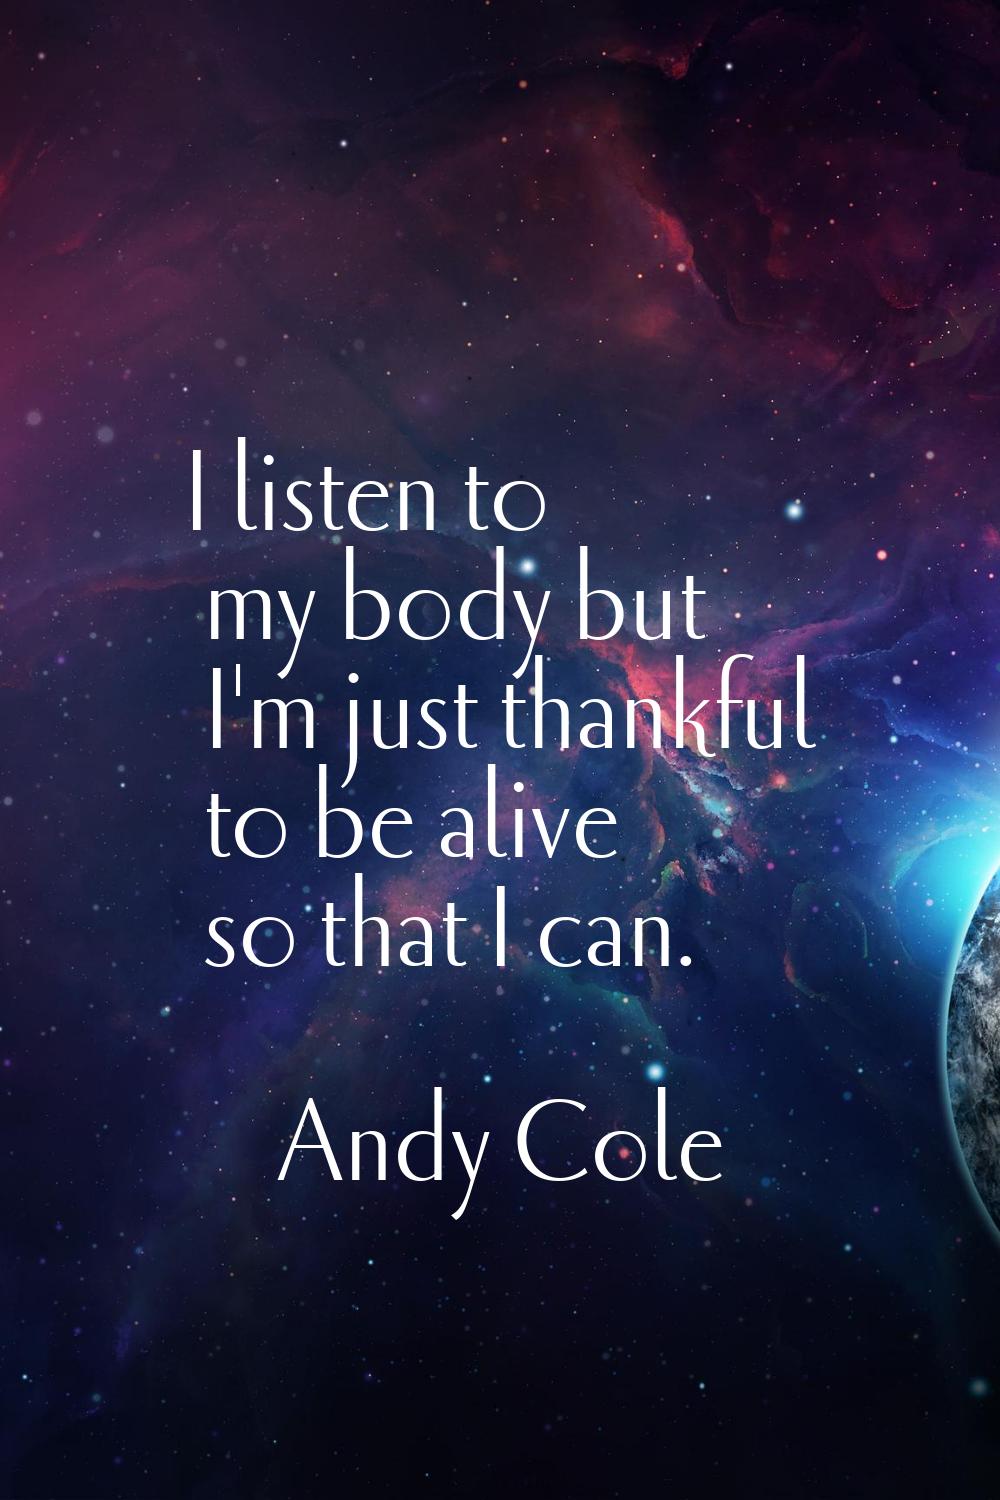 I listen to my body but I'm just thankful to be alive so that I can.